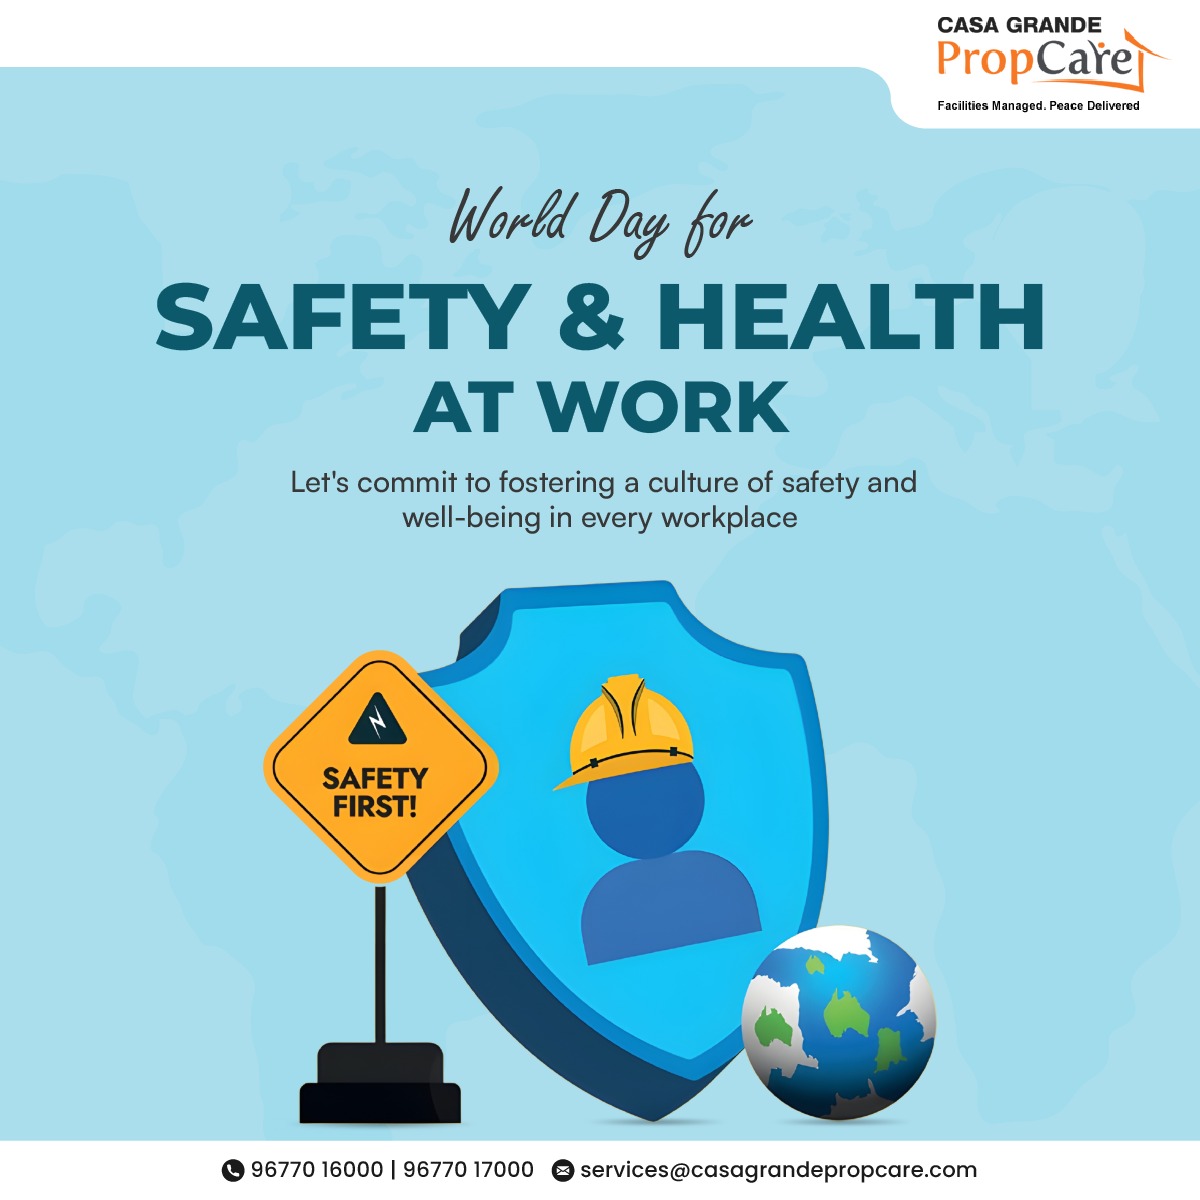 On World Day for Safety and Health at Work, let's prioritize safety, embrace wellness, and empower each other for a brighter, healthier workplace.

#SafetyFirst #HealthAtWork #SafeWorkplaces #WorkplaceWellness #HealthyWorkforce
#WorkplaceSafety